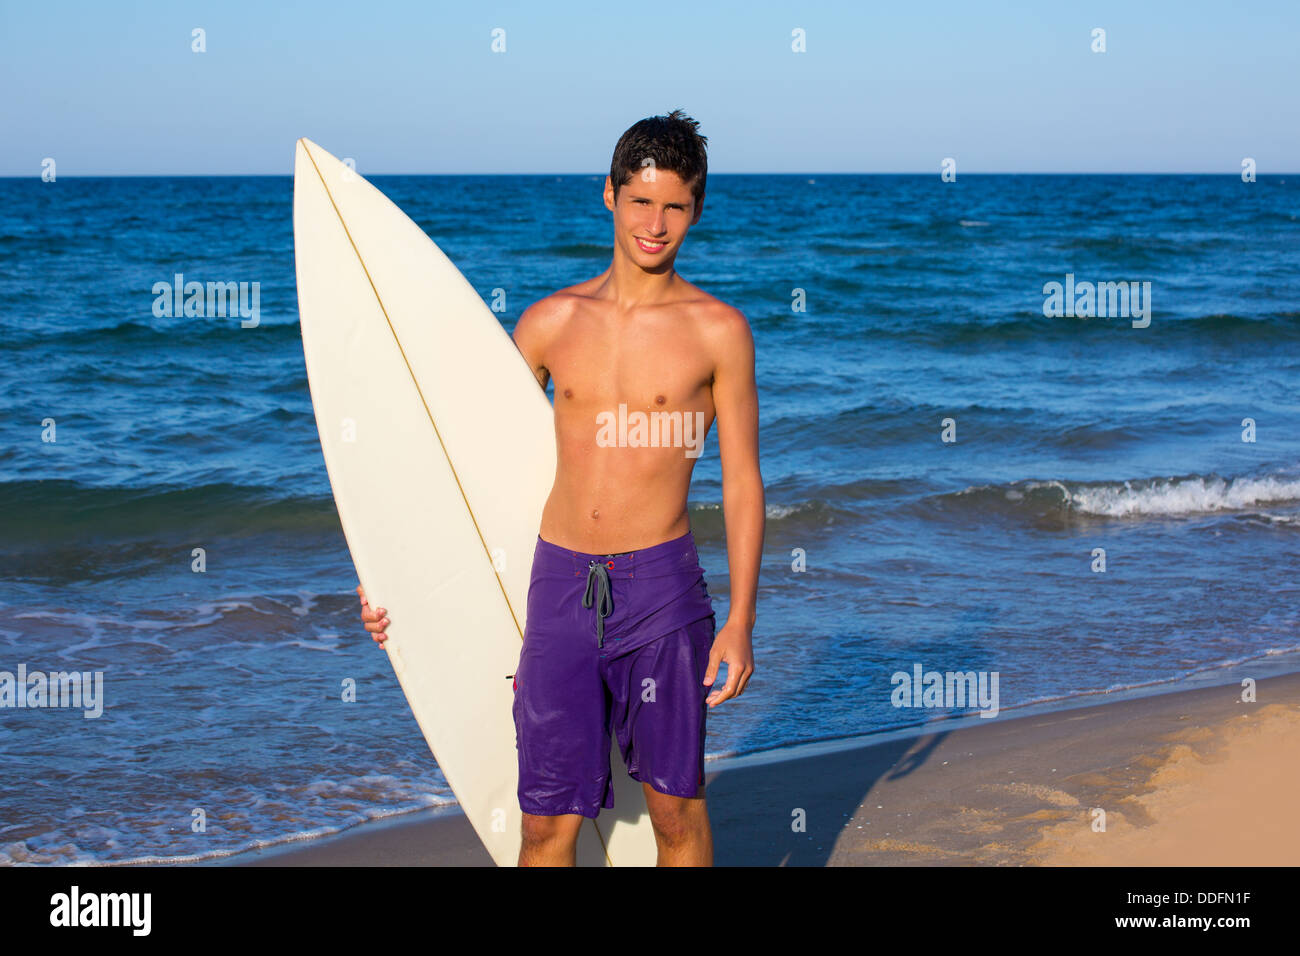 Teen Surfer Boy High Resolution Stock Photography and Images - Alamy